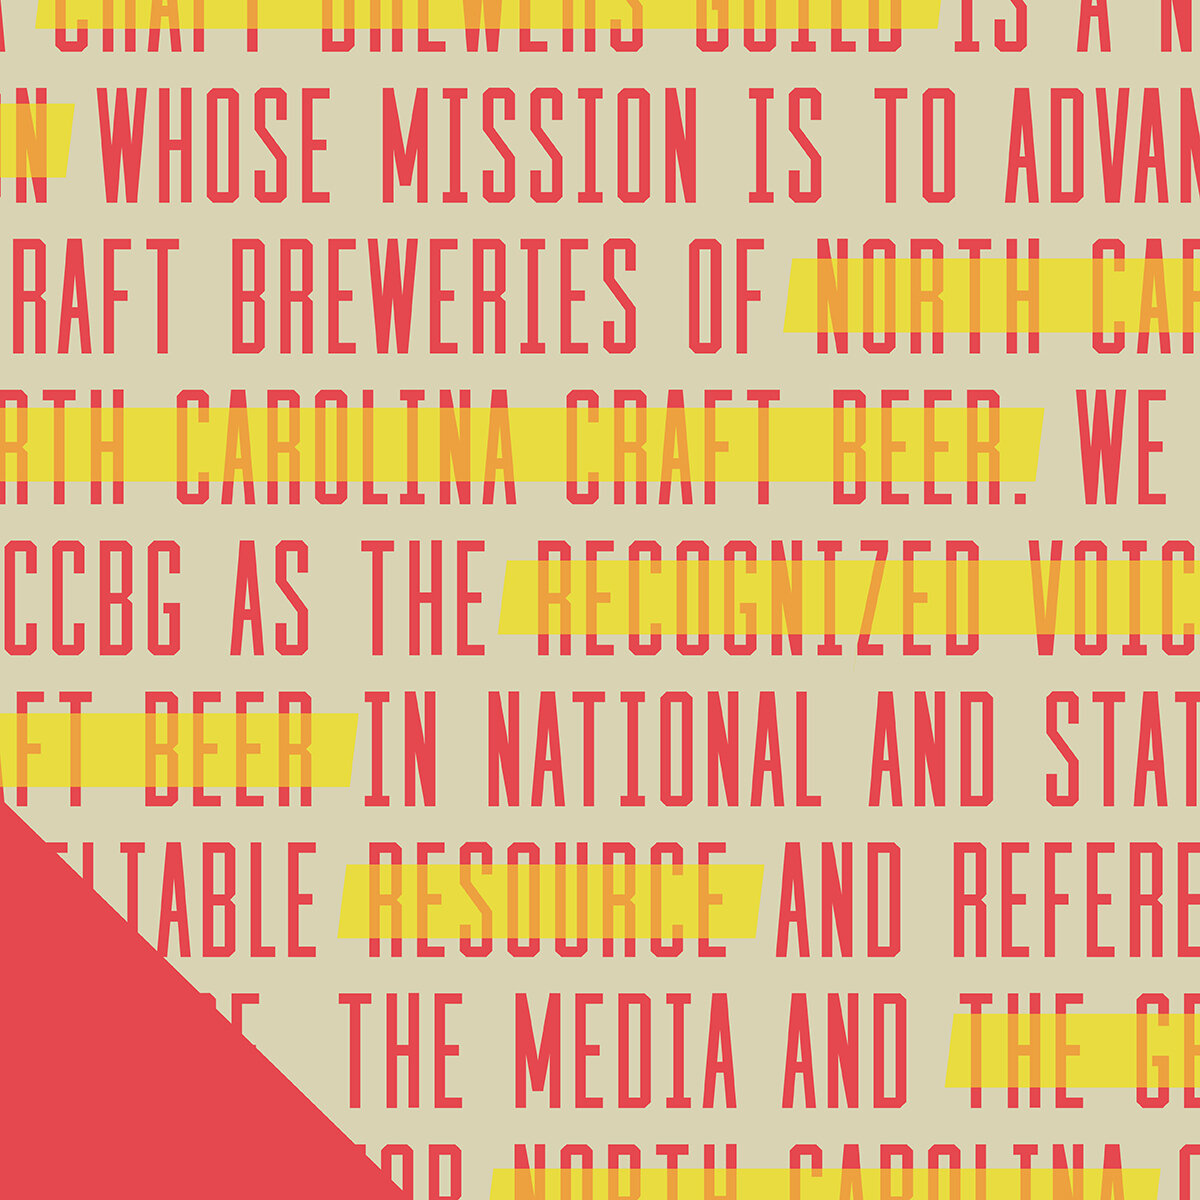 NC Craft Beer Conference Identity 02.jpg